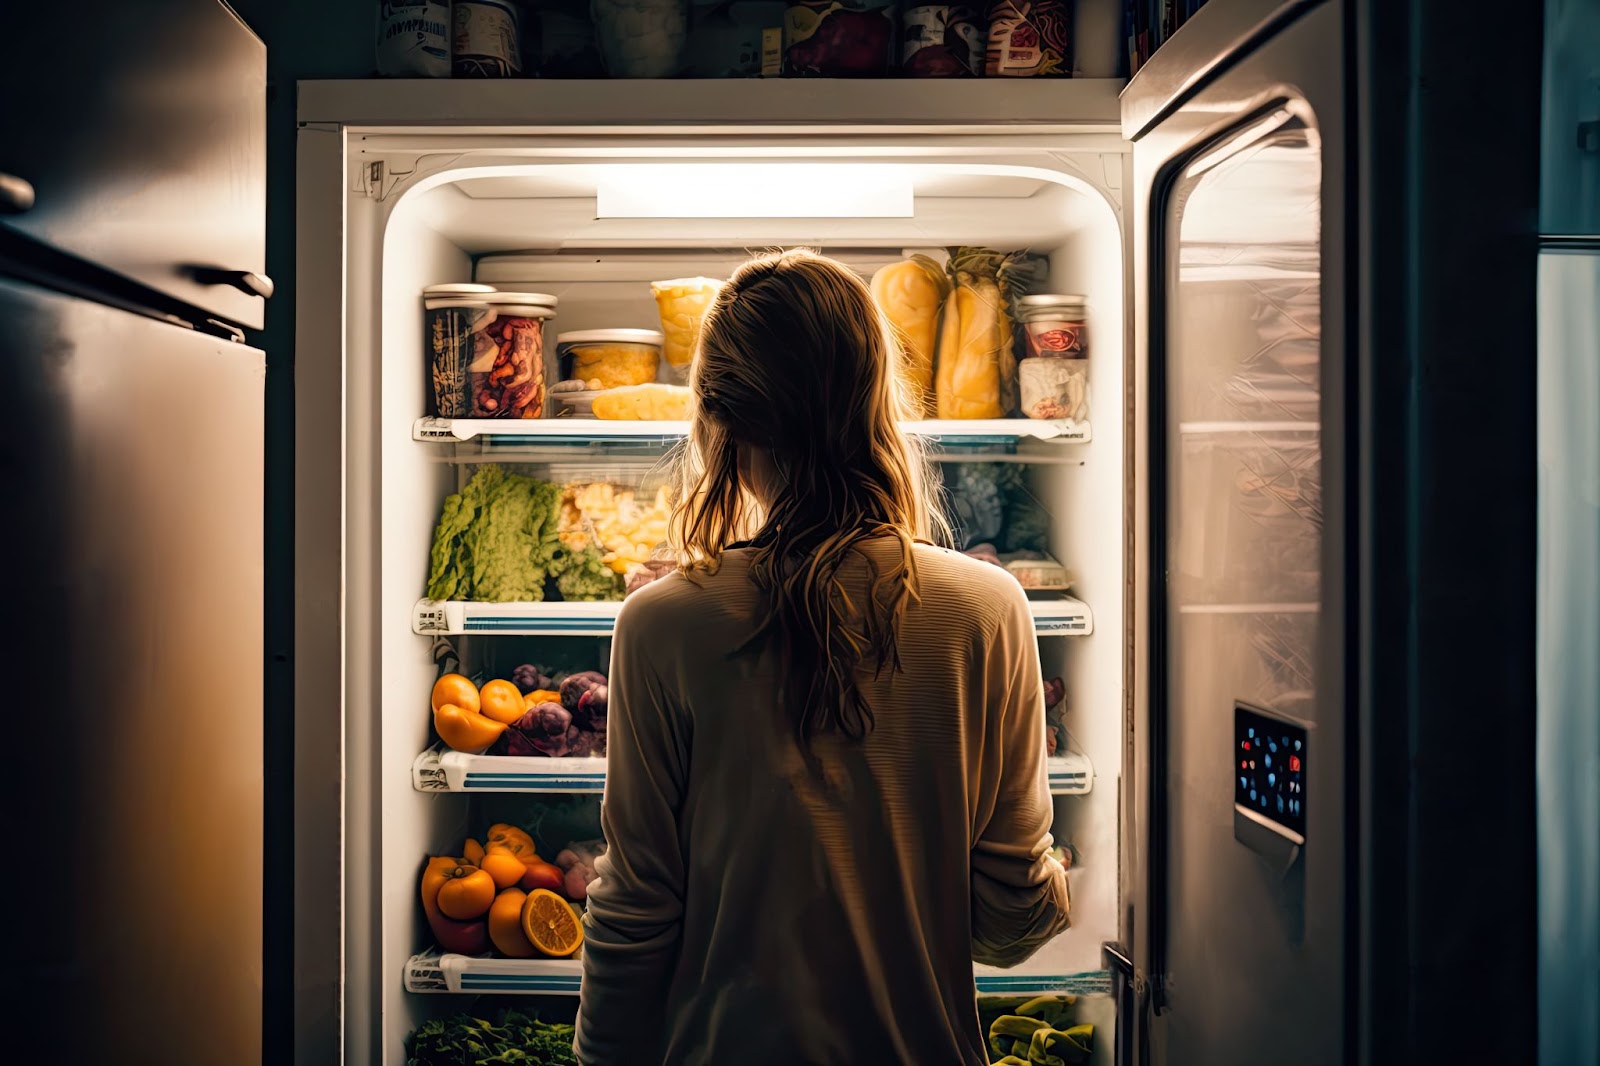 Young blonde woman opening up a refrigerator at night